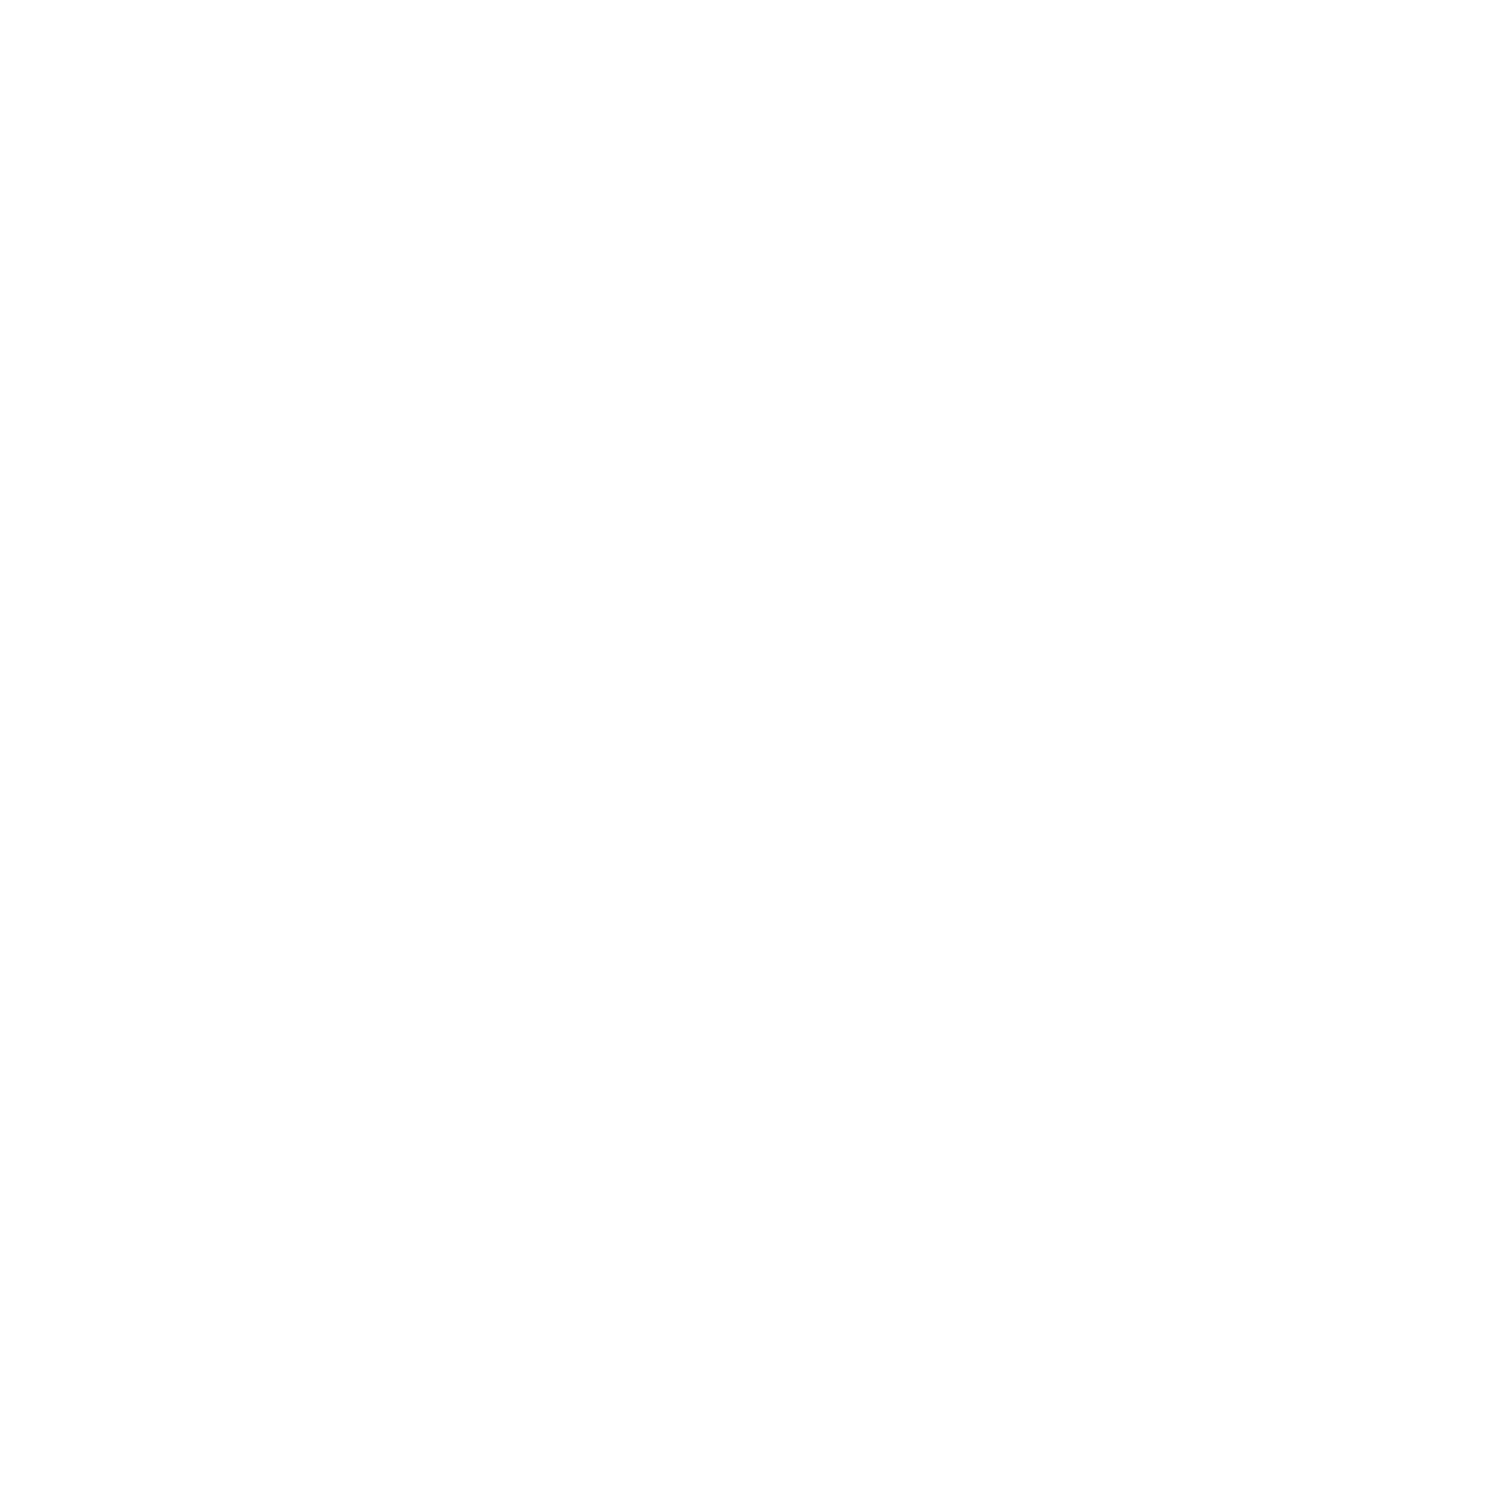 The Dime Wortley